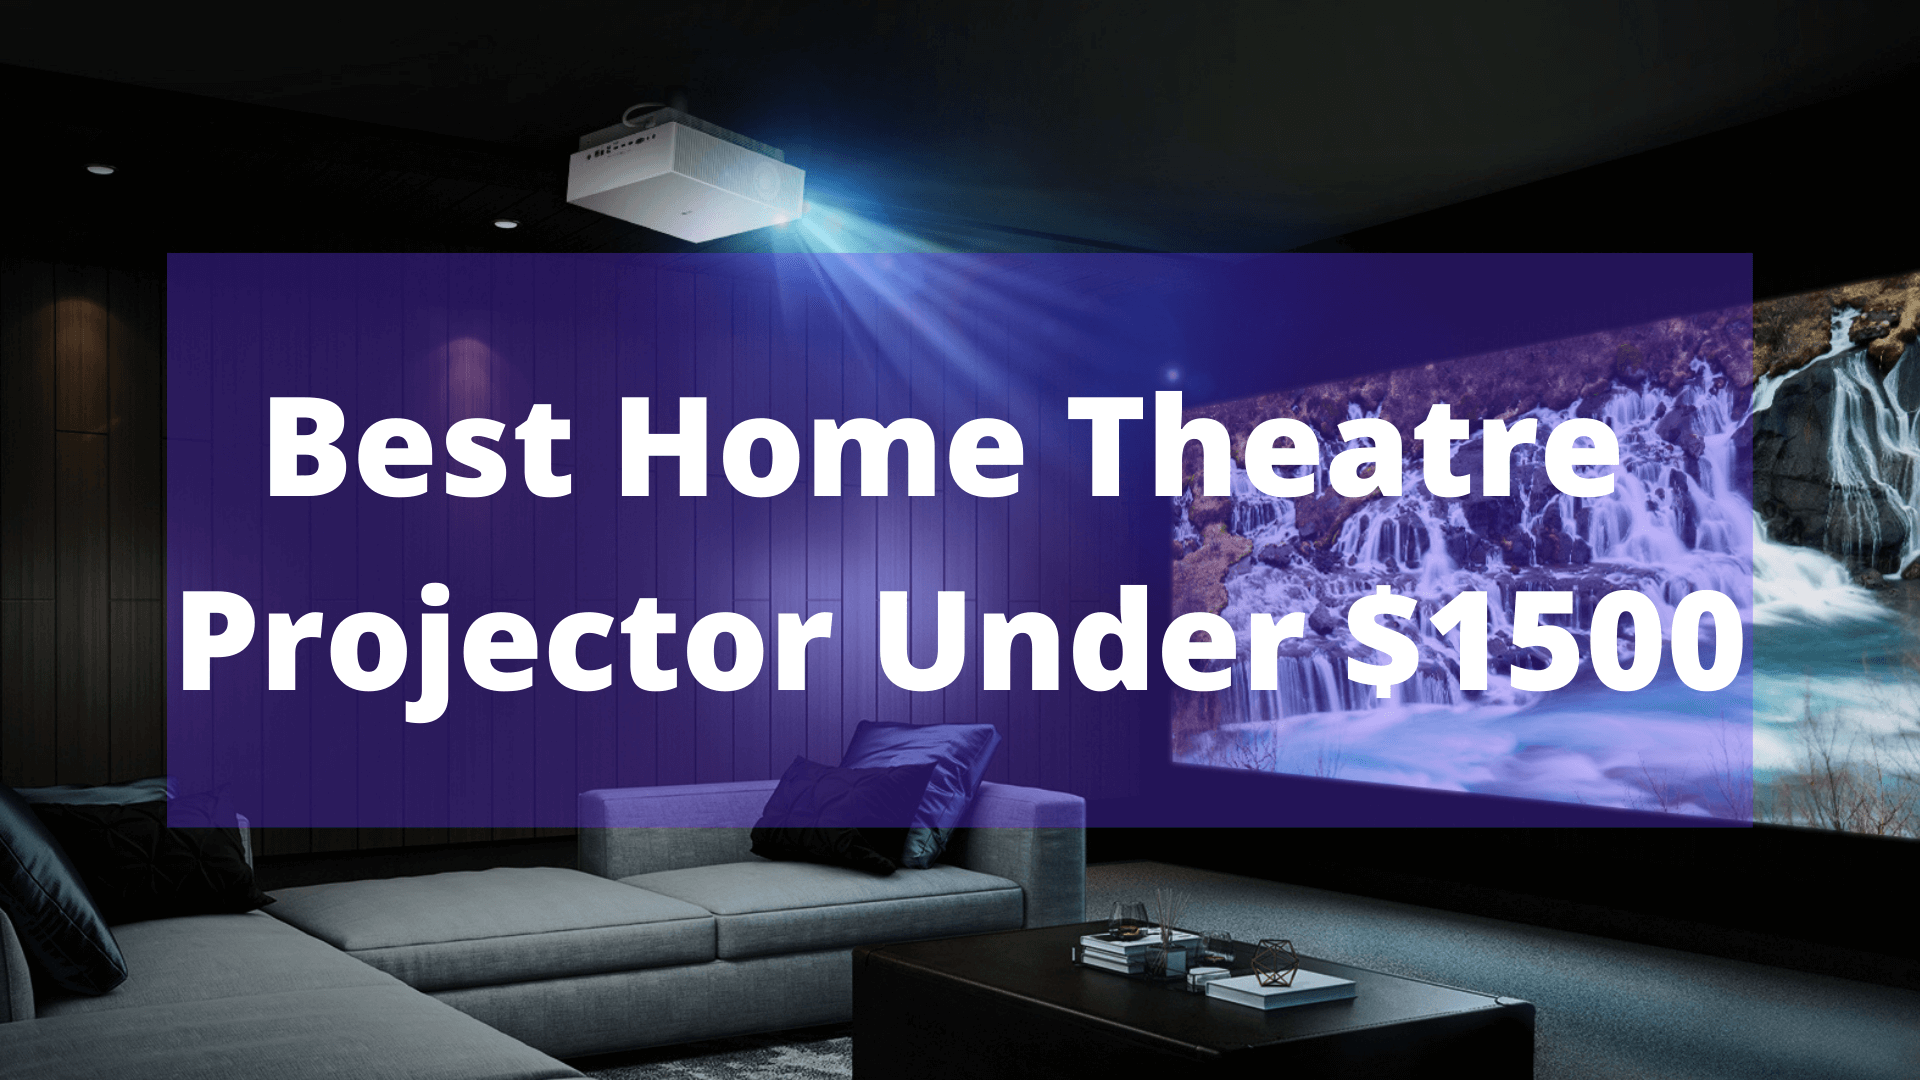 Best Home Theatre Projector Under $1500